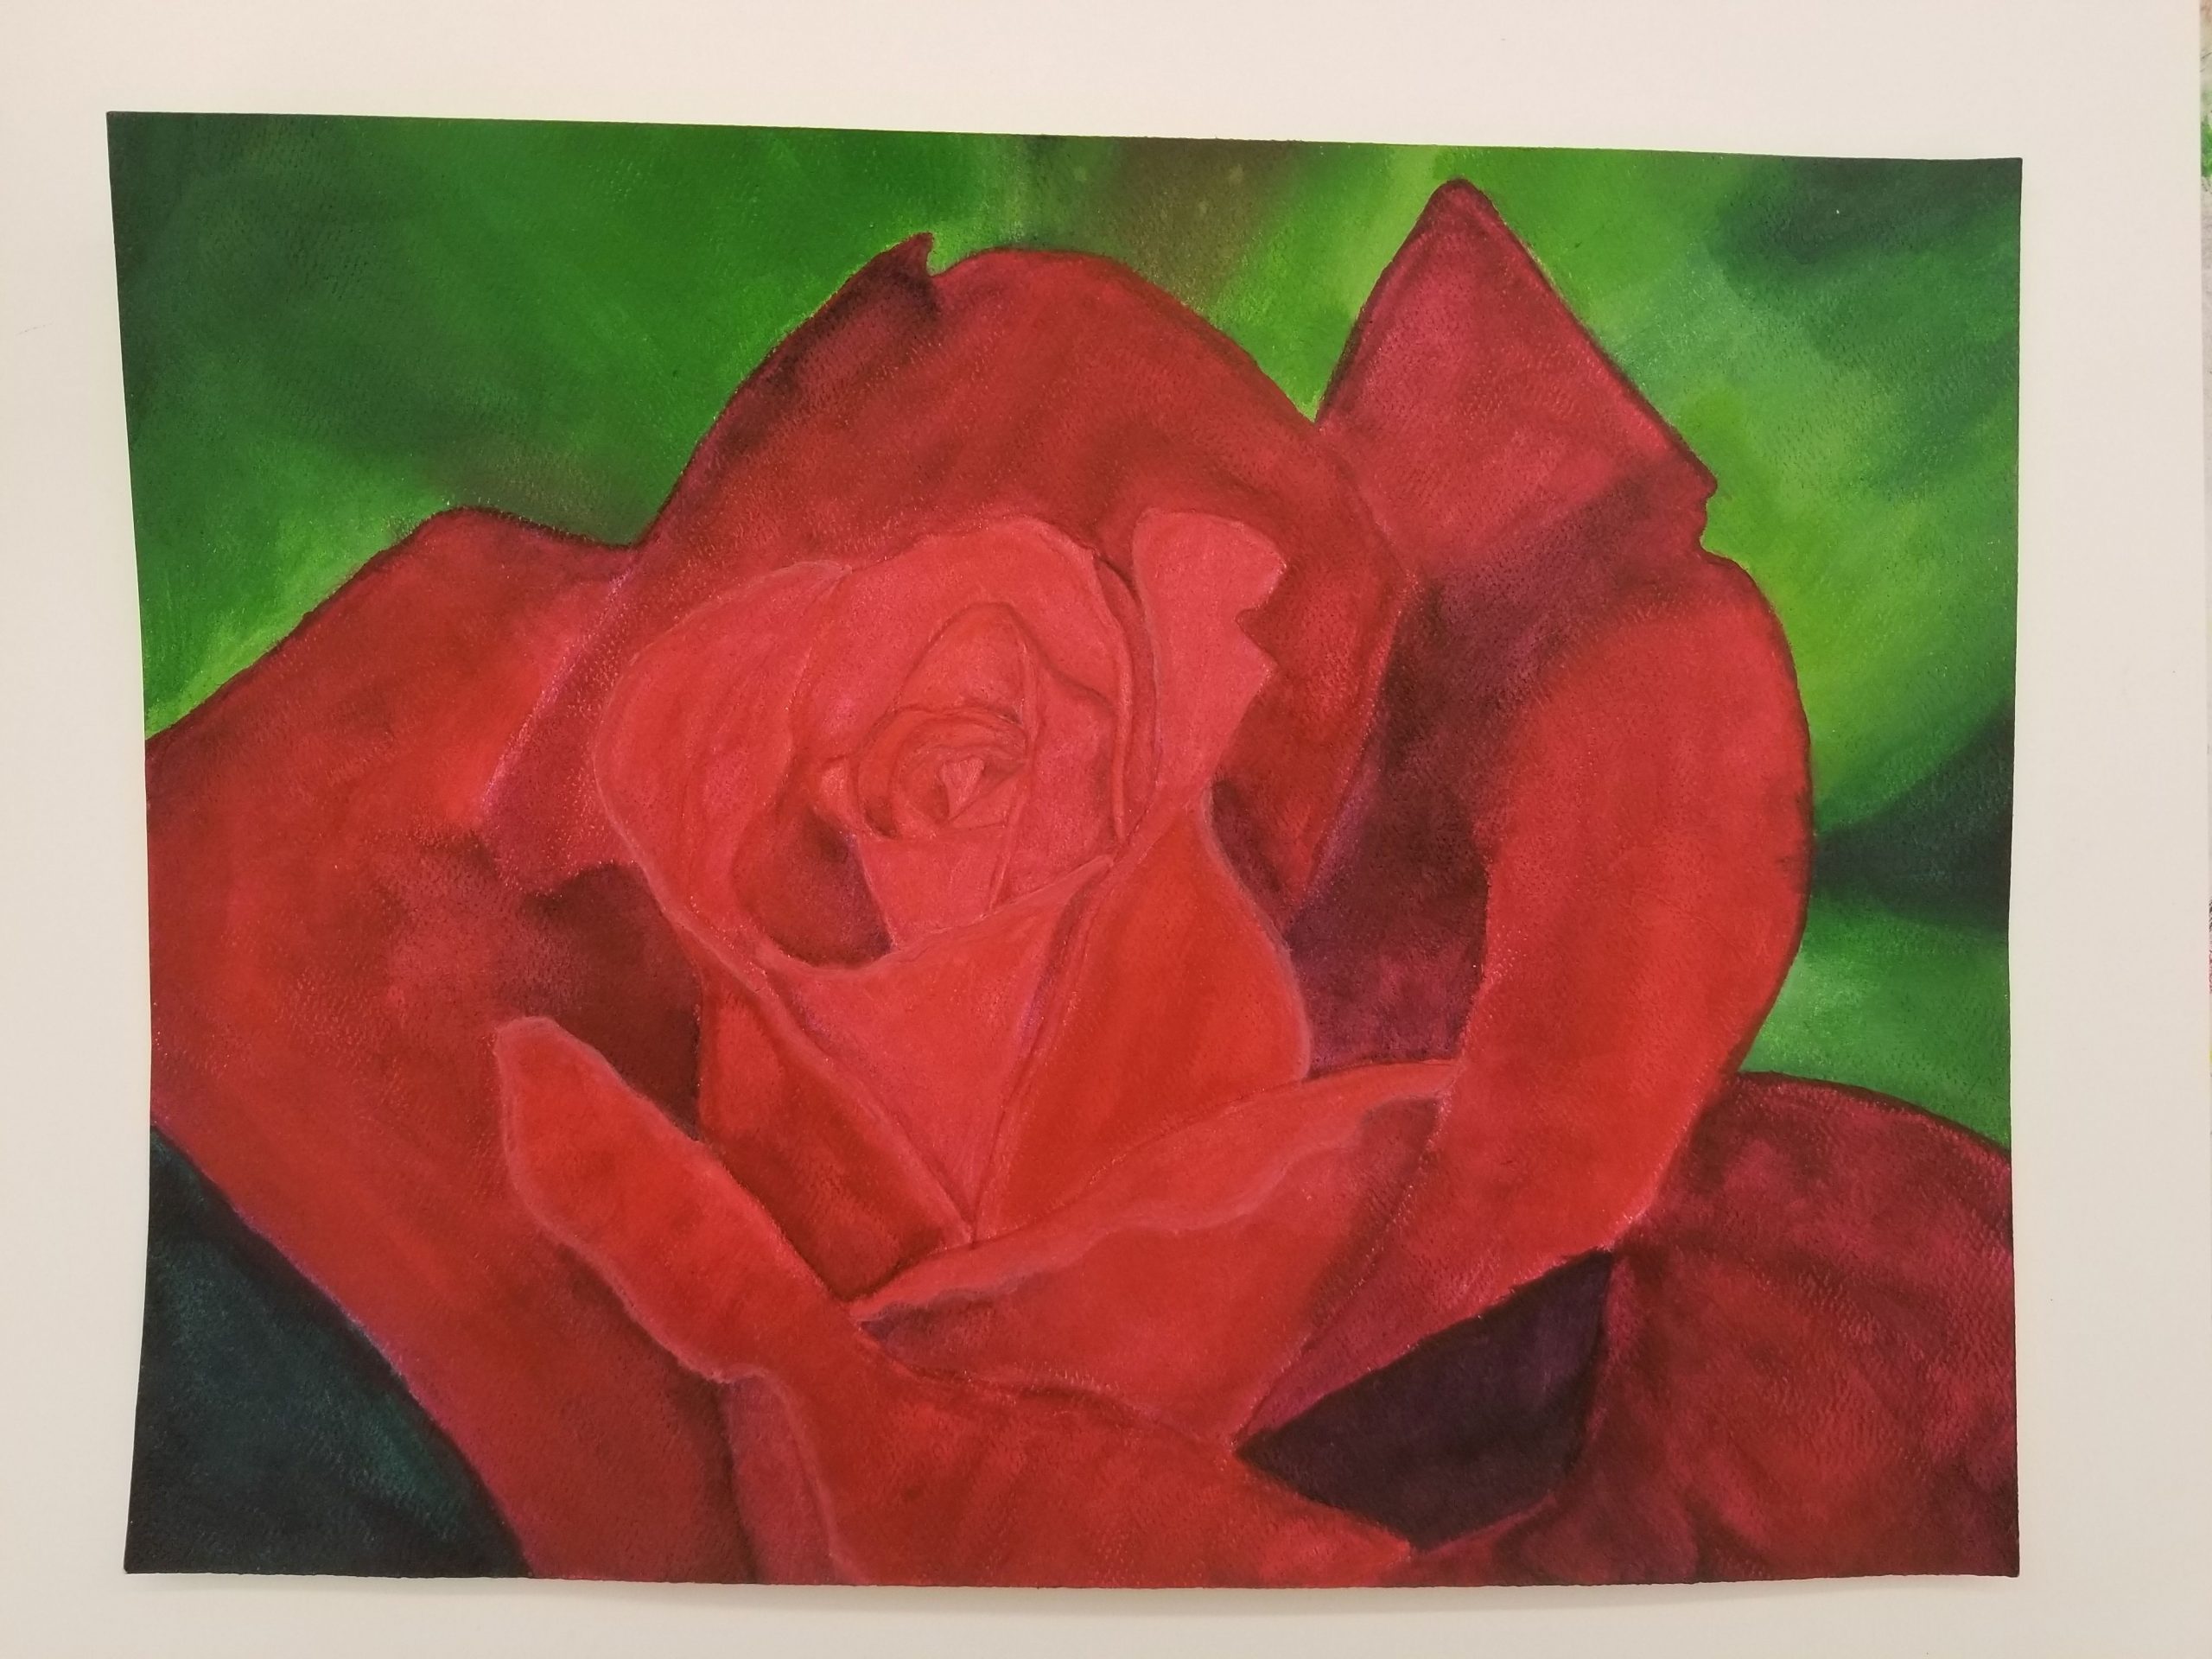 Image of a red rose, original artwork by D. Ponce